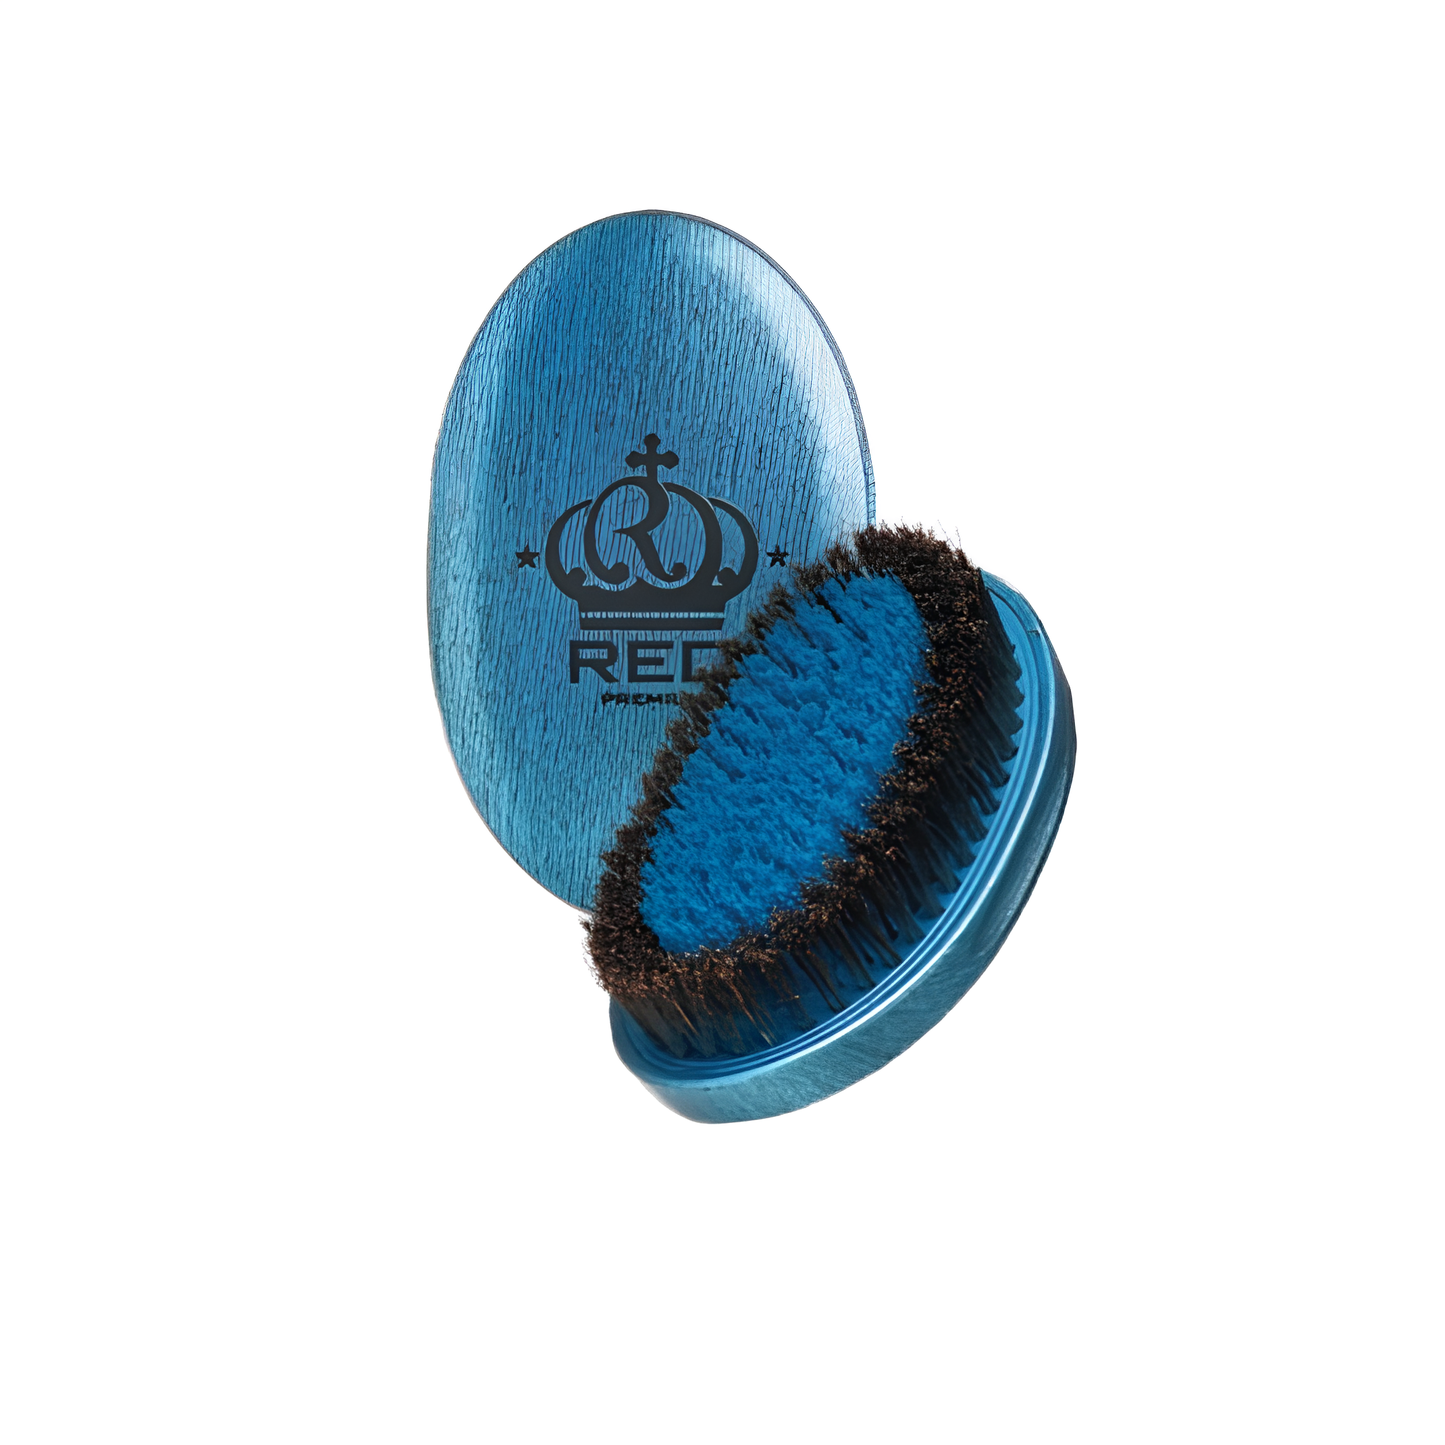 BOW WOW X Pocket Wave Premium Metallic 2-in-1 Boar Brush with Case